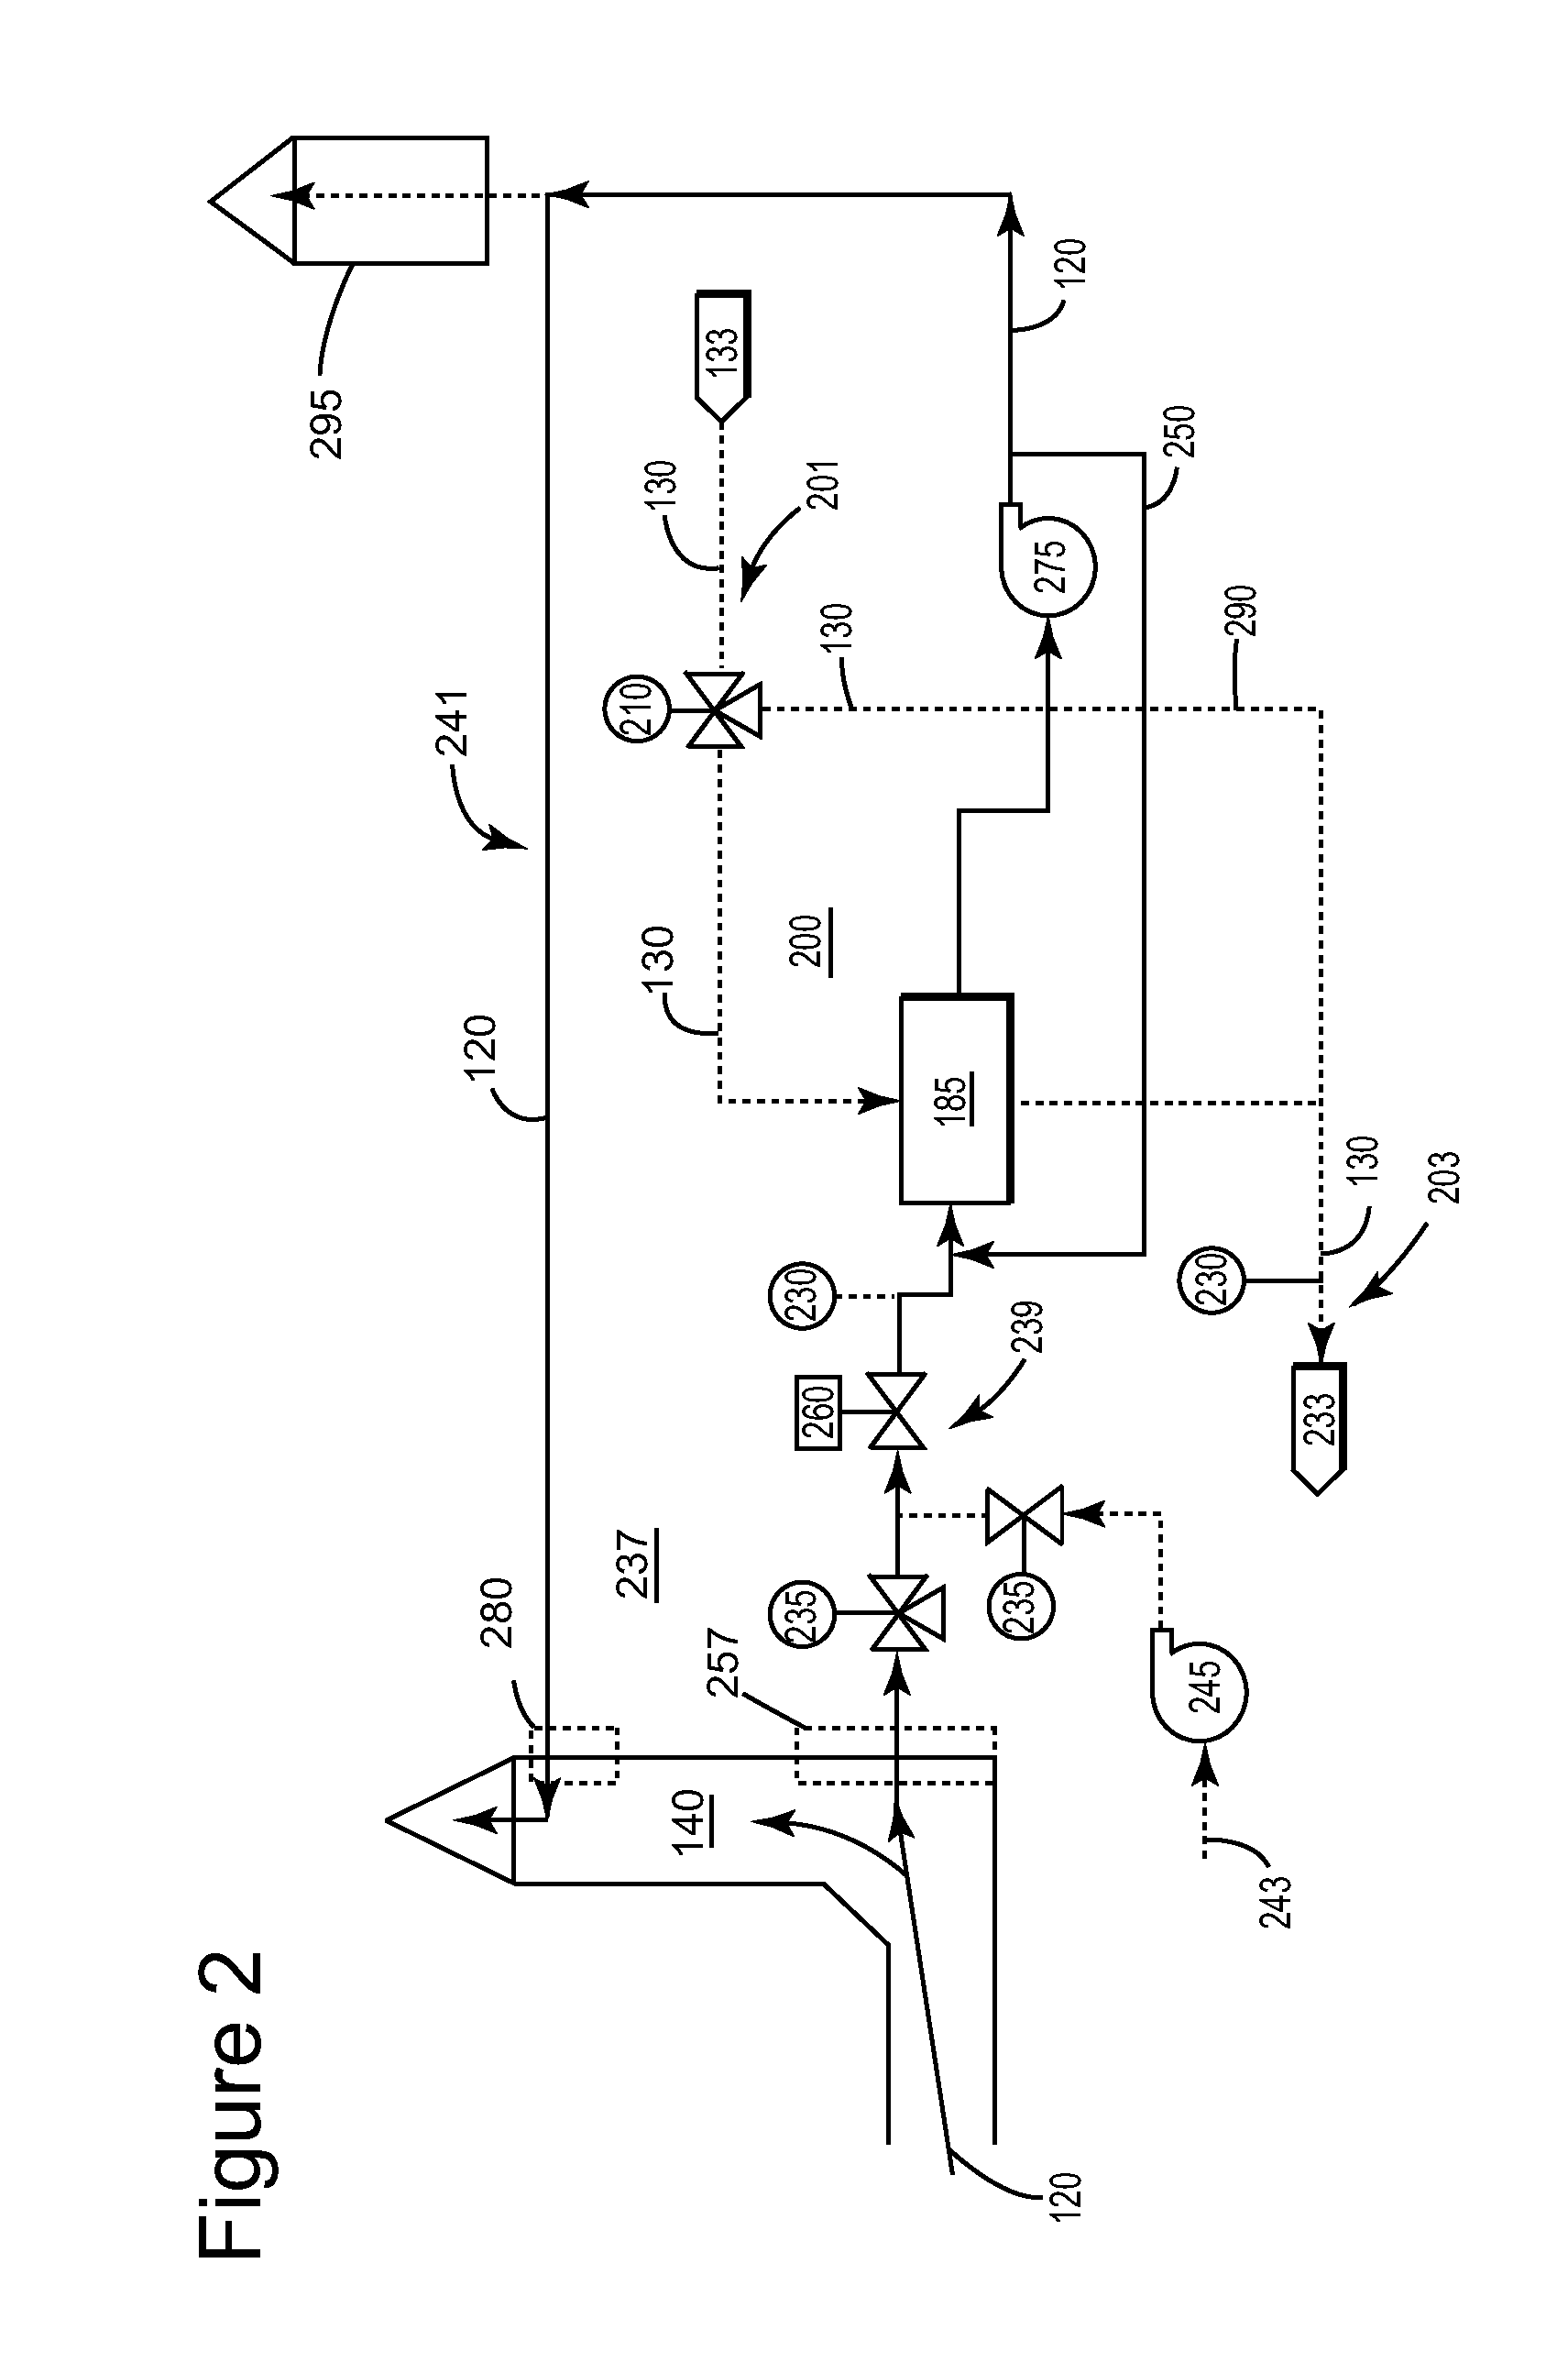 System for heating a fuel